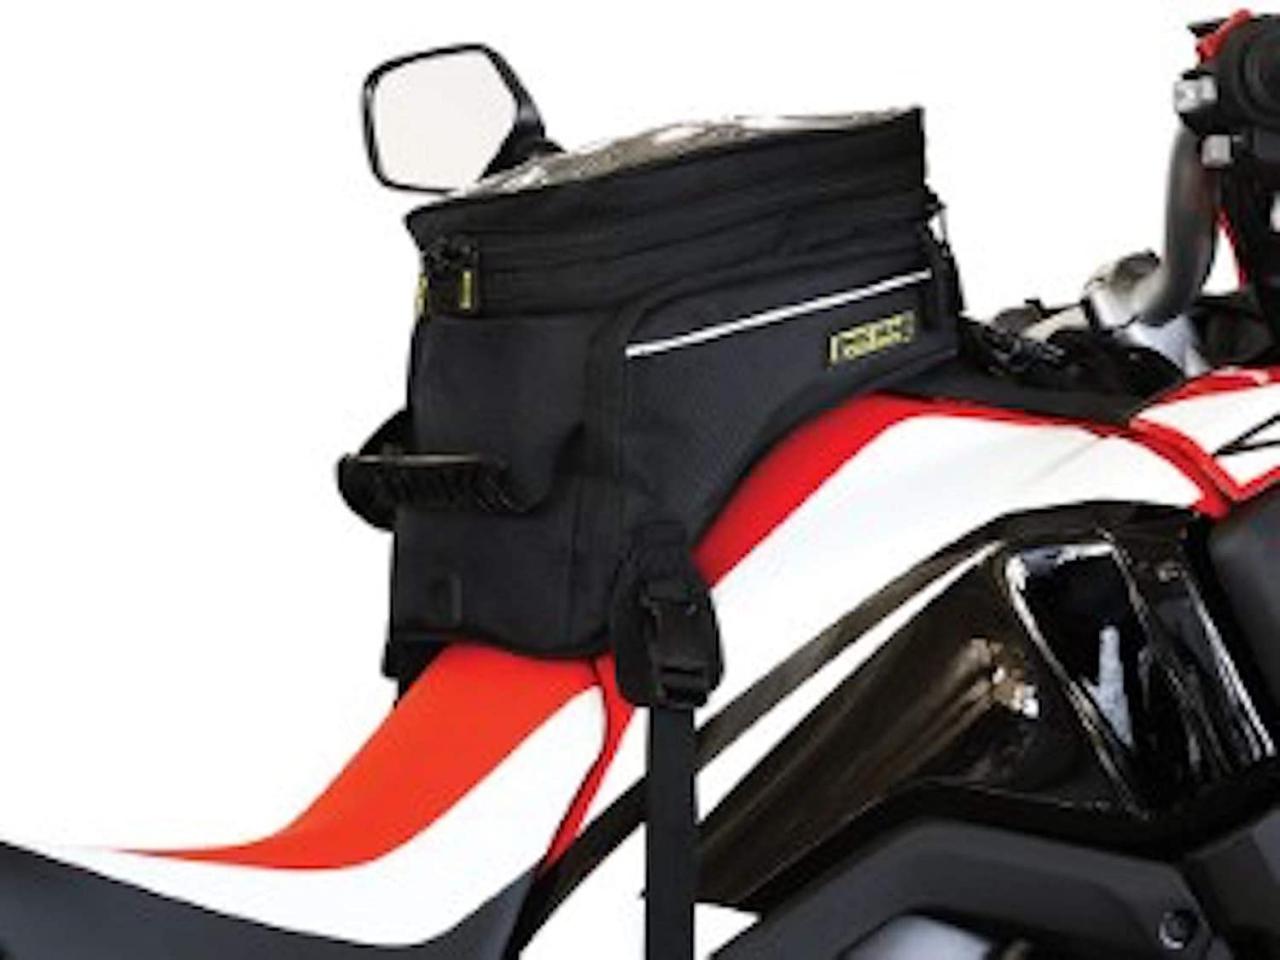 Nelson-Rigg Journey Magnetic Tank Bag - Gear Review | Rider Magazine